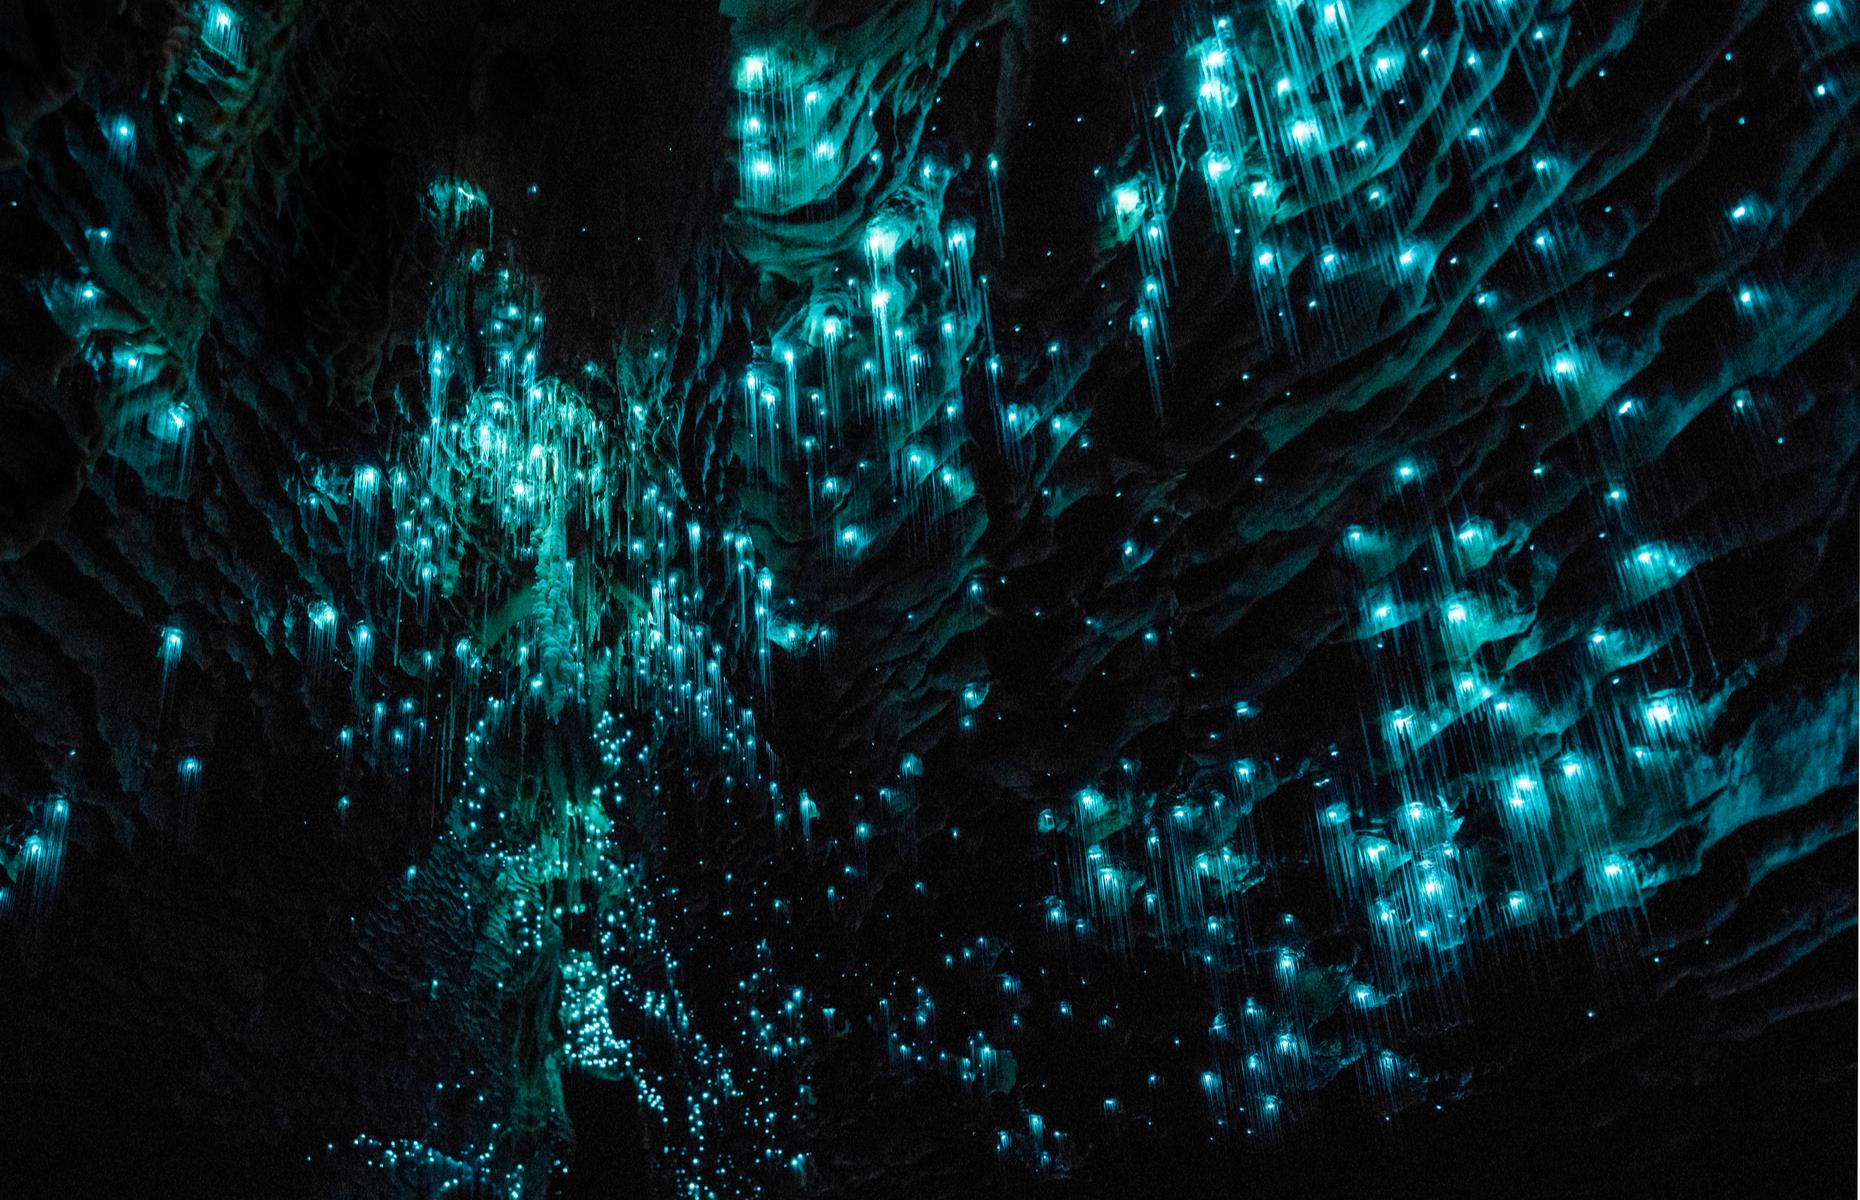 <p>The Waitomo region on the North Island has plenty of limestone caves to explore and a boat ride through the dimly lit <a href="https://www.waitomo.com/experiences/waitomo-glowworm-caves">Waitomo Glowworm Caves</a> is unmissable. Gliding along in silence with the cavern lit by what looks like thousands of stars is a magical experience.</p>  <p><strong><a href="https://www.loveexploring.com/galleries/74880/the-worlds-most-incredible-caves-caverns?page=1">The world's most beautiful caverns and caves</a></strong> </p>